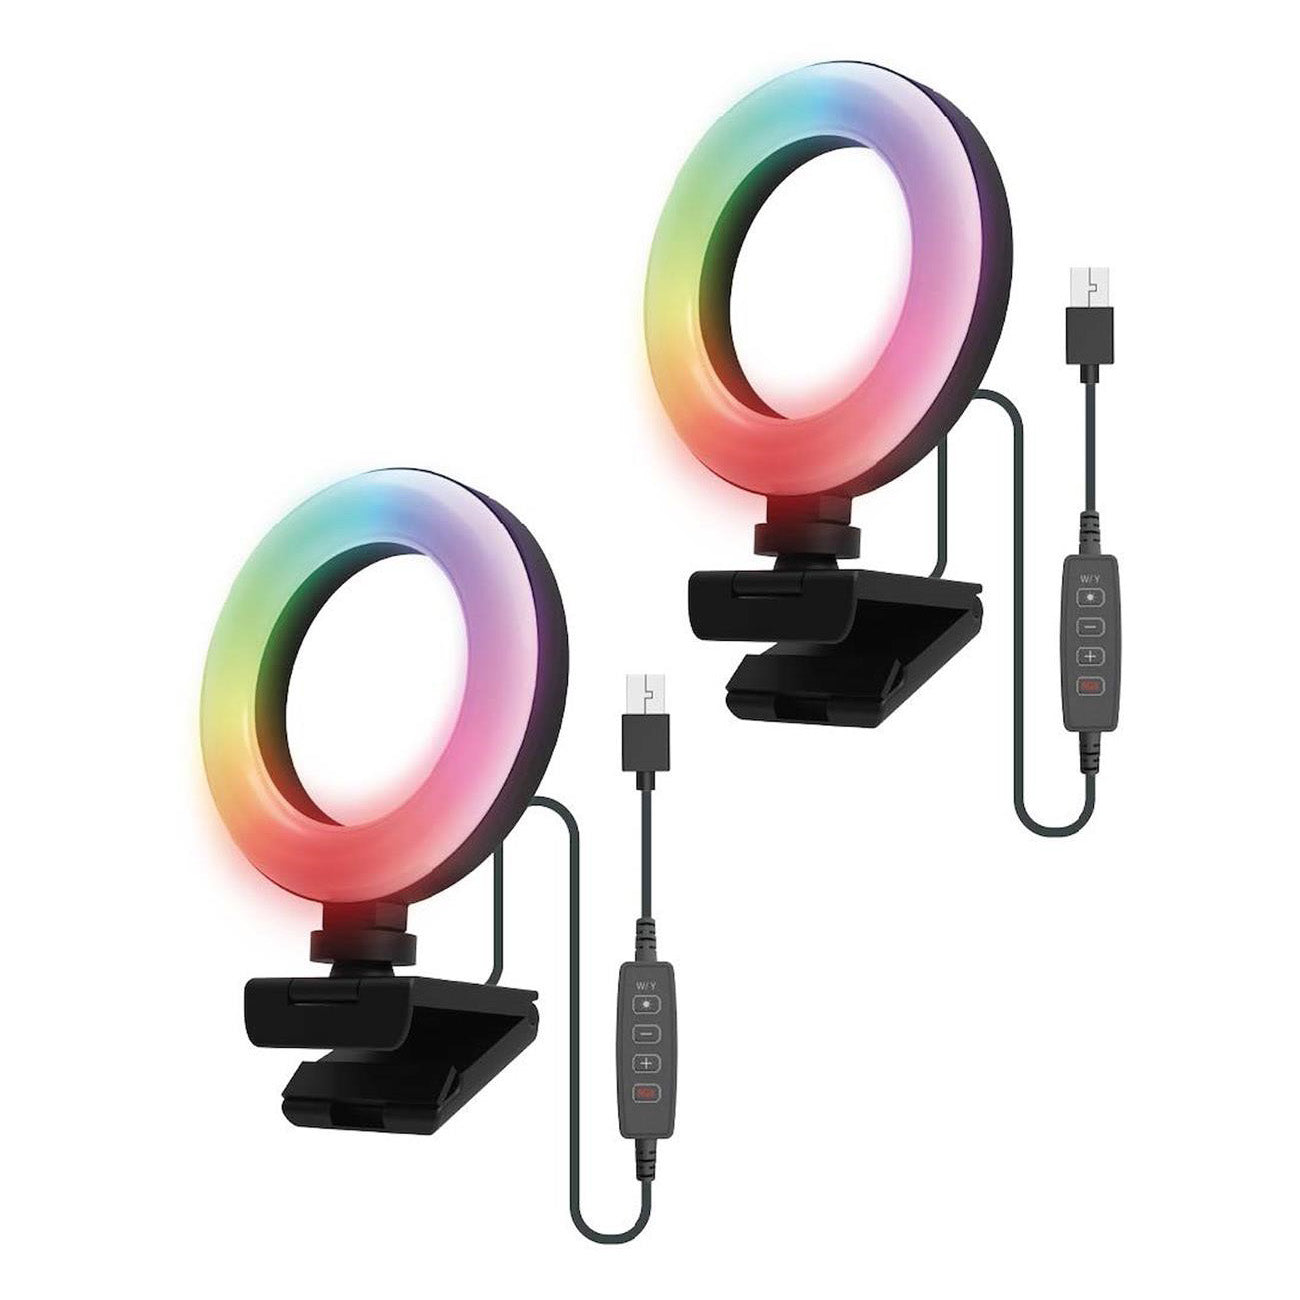 Digipower 4.5" Clip-On Laptop RGB Video Ring Light, 7 Color & 11 Special Effects W/Full Remote Control, 2 Pack